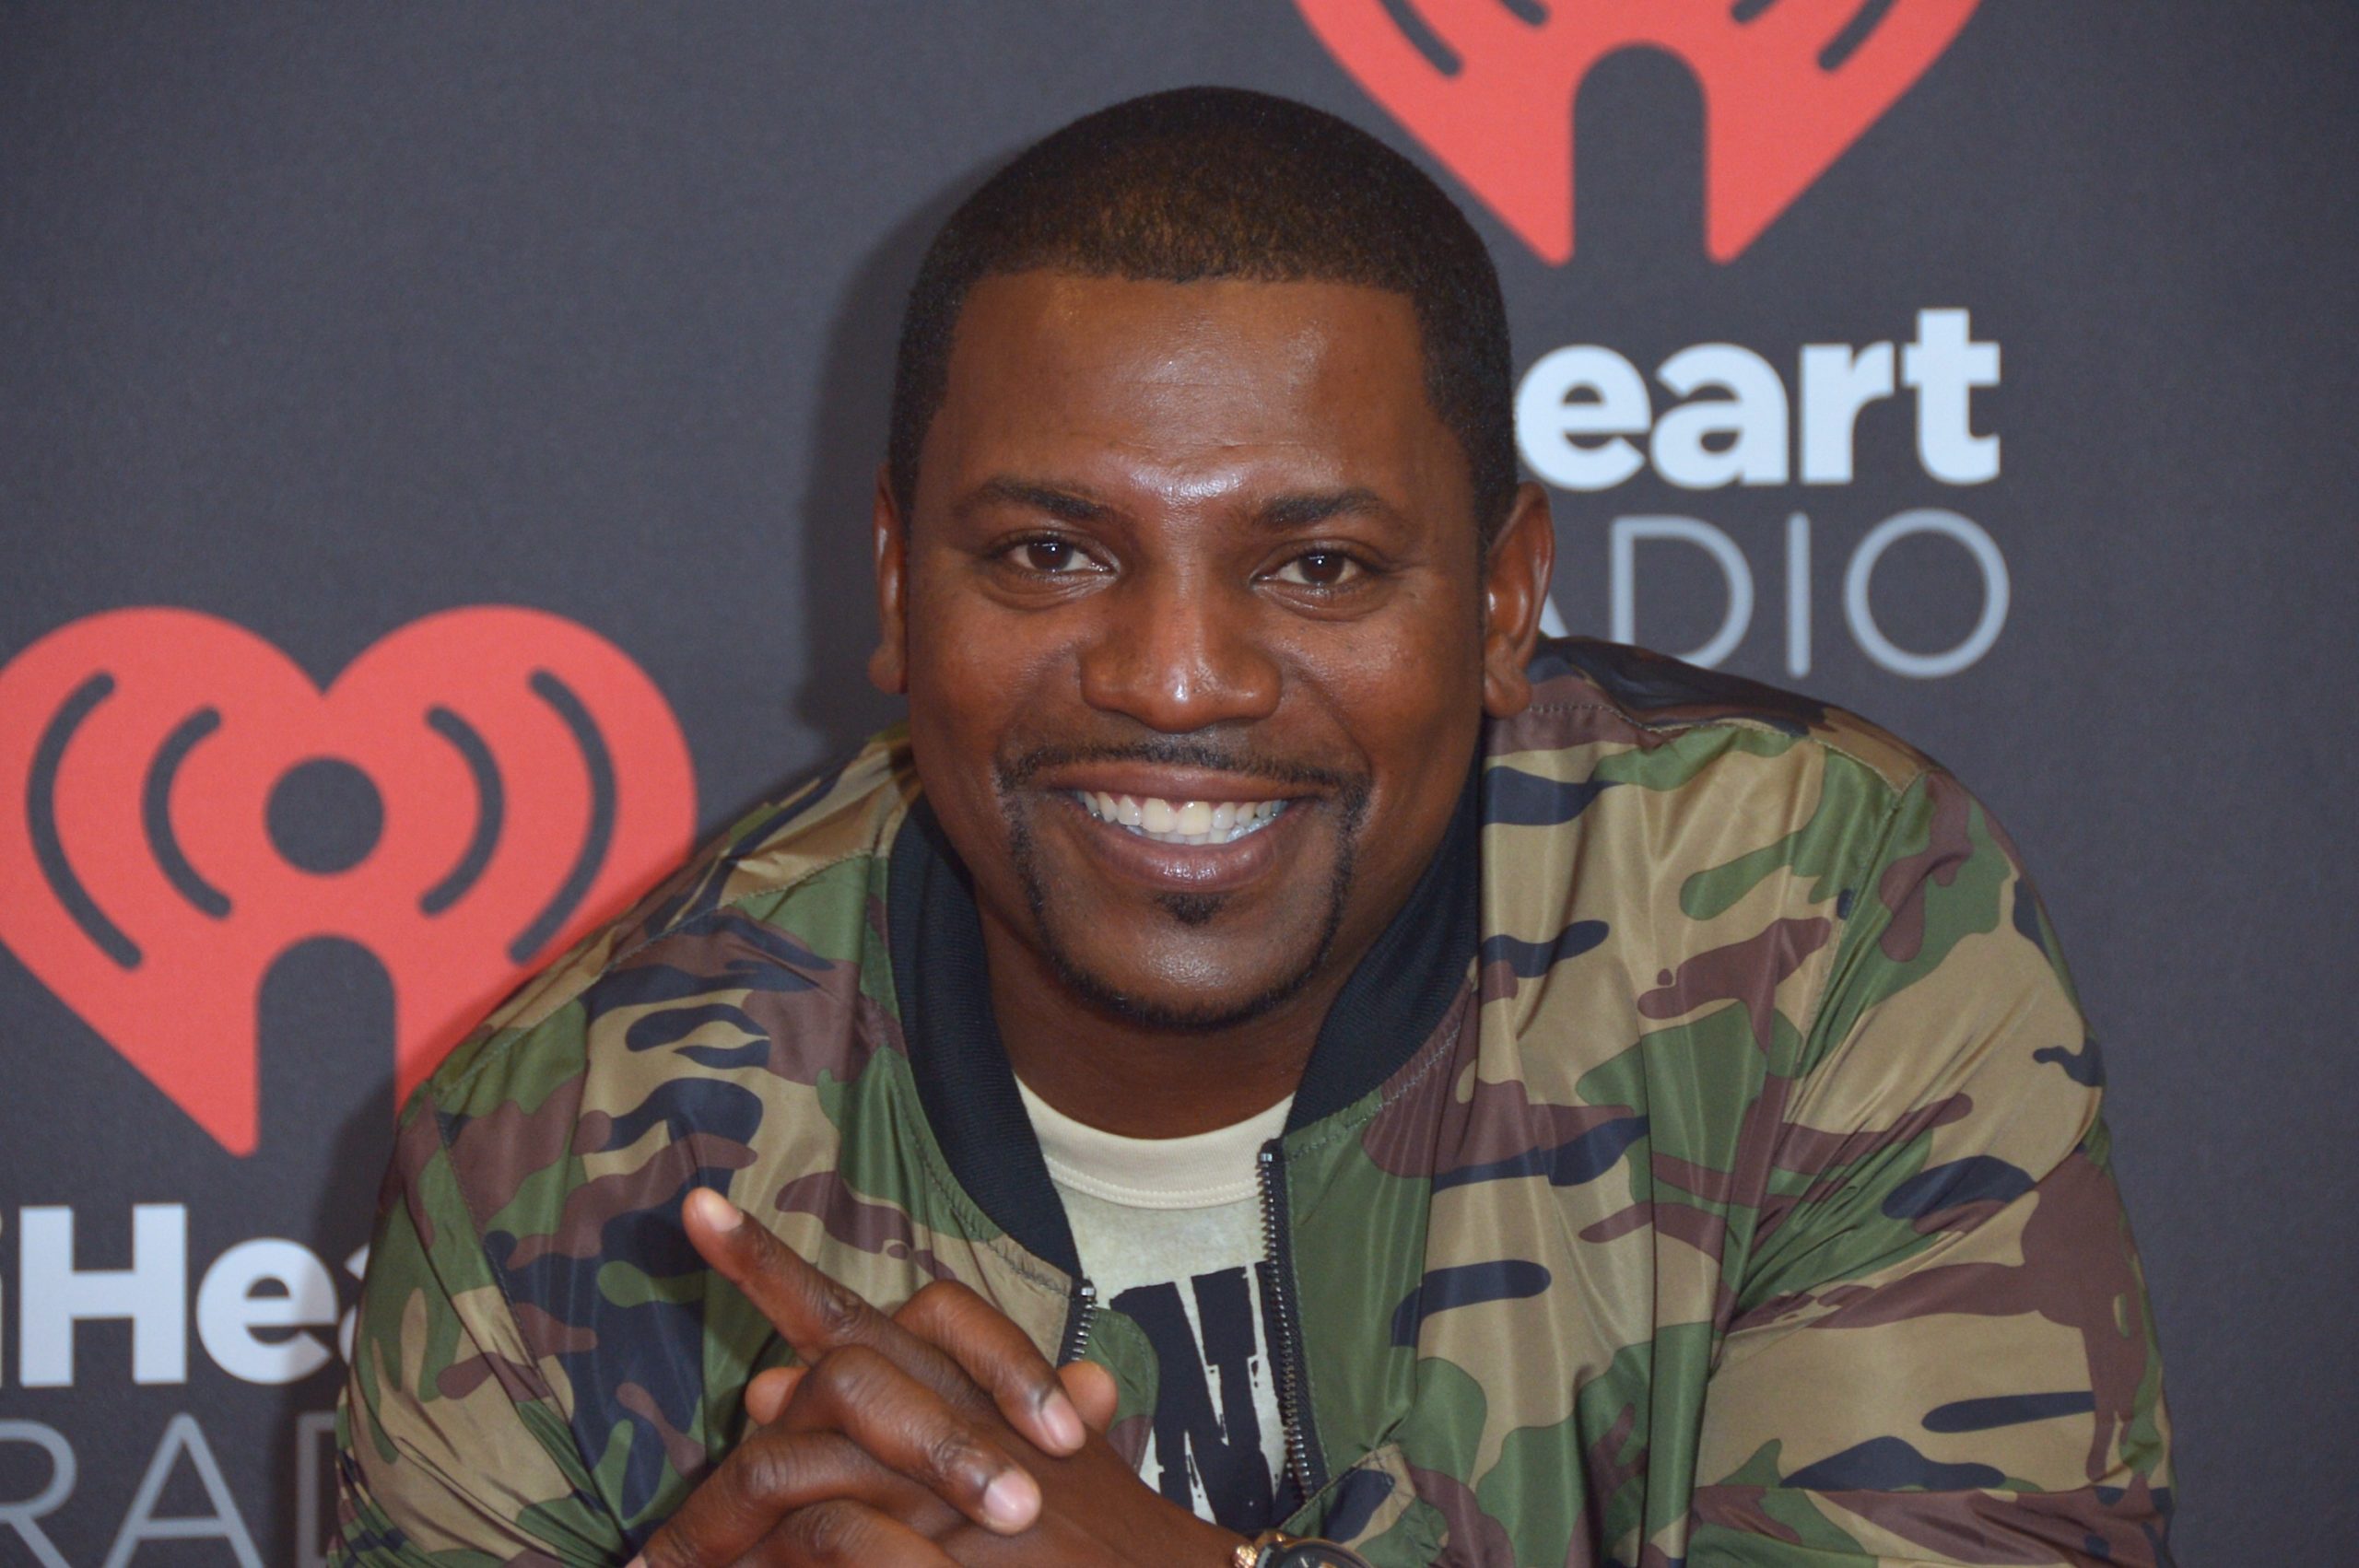 Azie Faison on How He Met Alpo, Rich Porter Co-Signing Him from